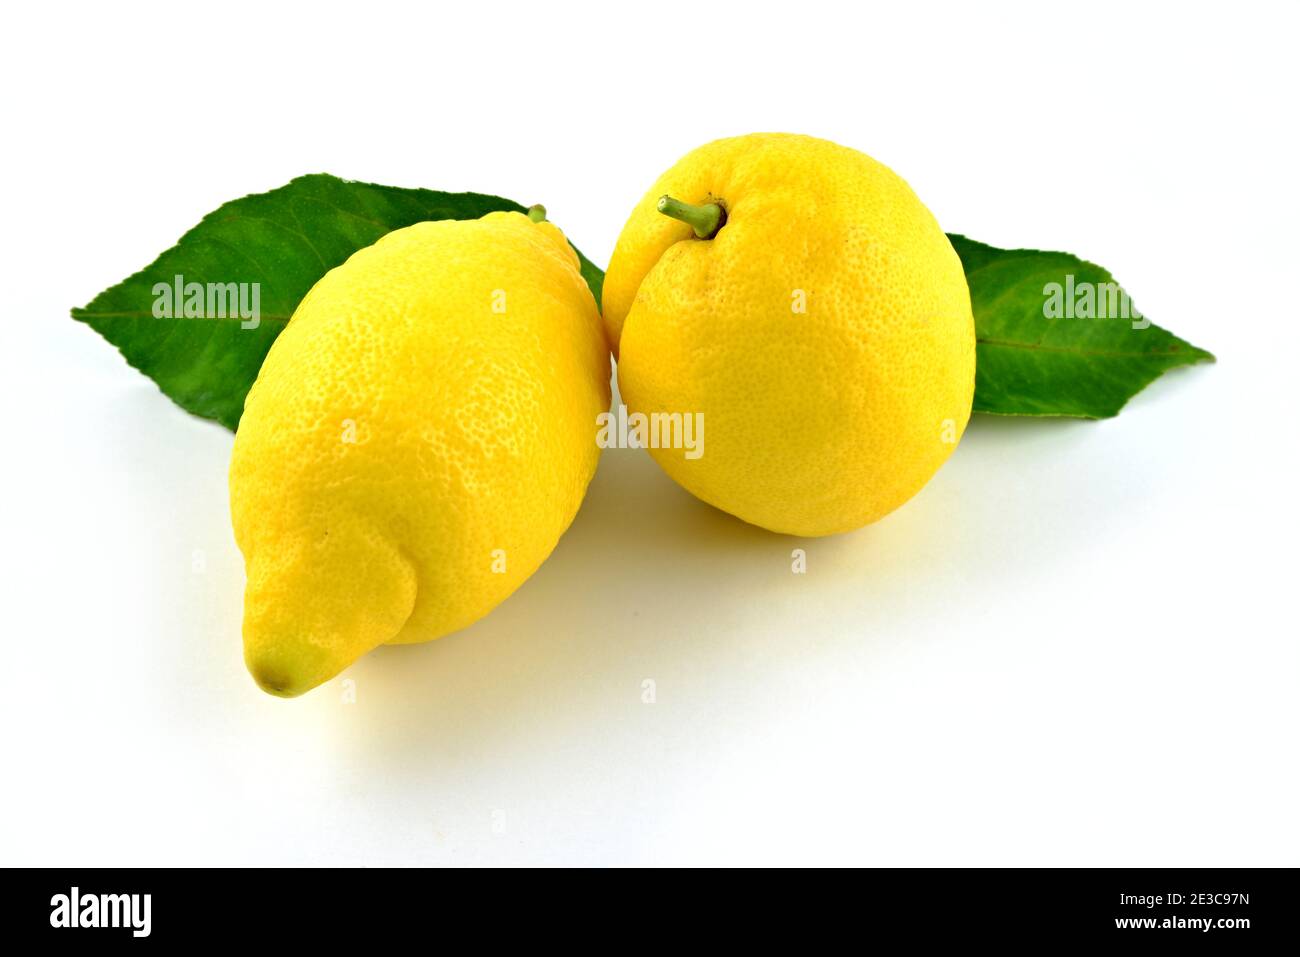 Two yellow lemons with green leaves on white background. Fresh citrus. Stock Photo